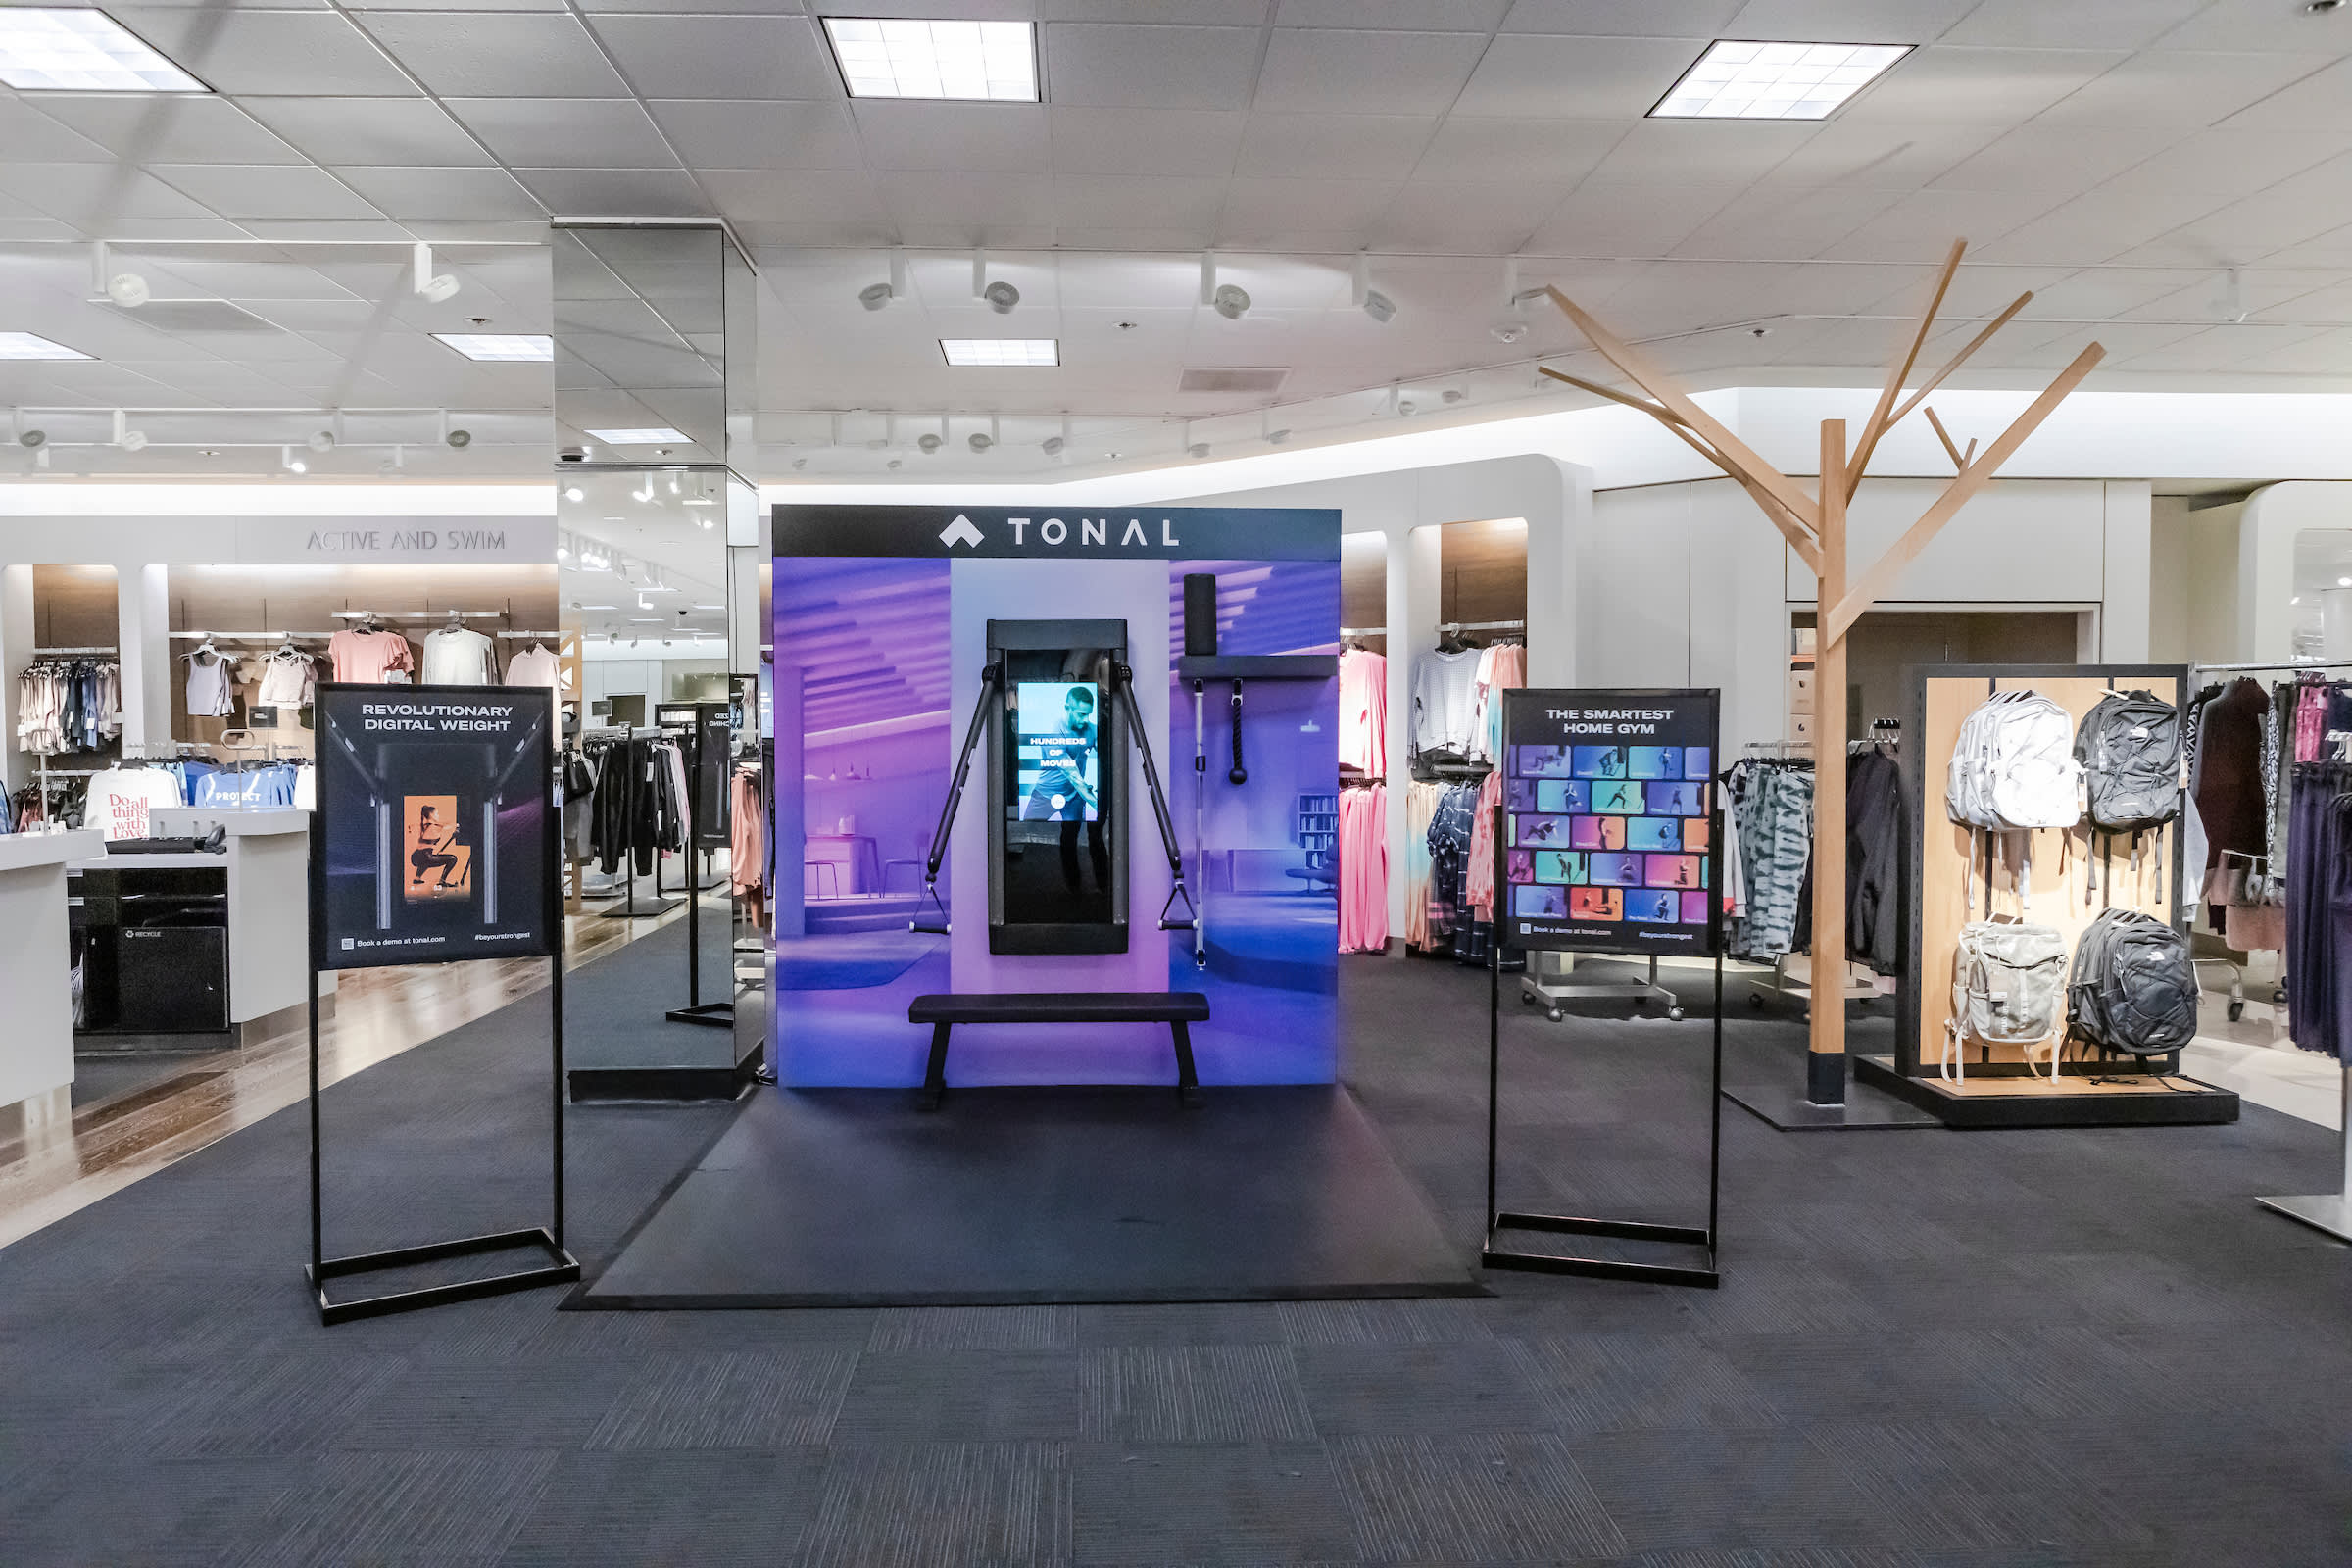 Nordstrom will add Tonal stores to 40 stores to enhance fitness deals